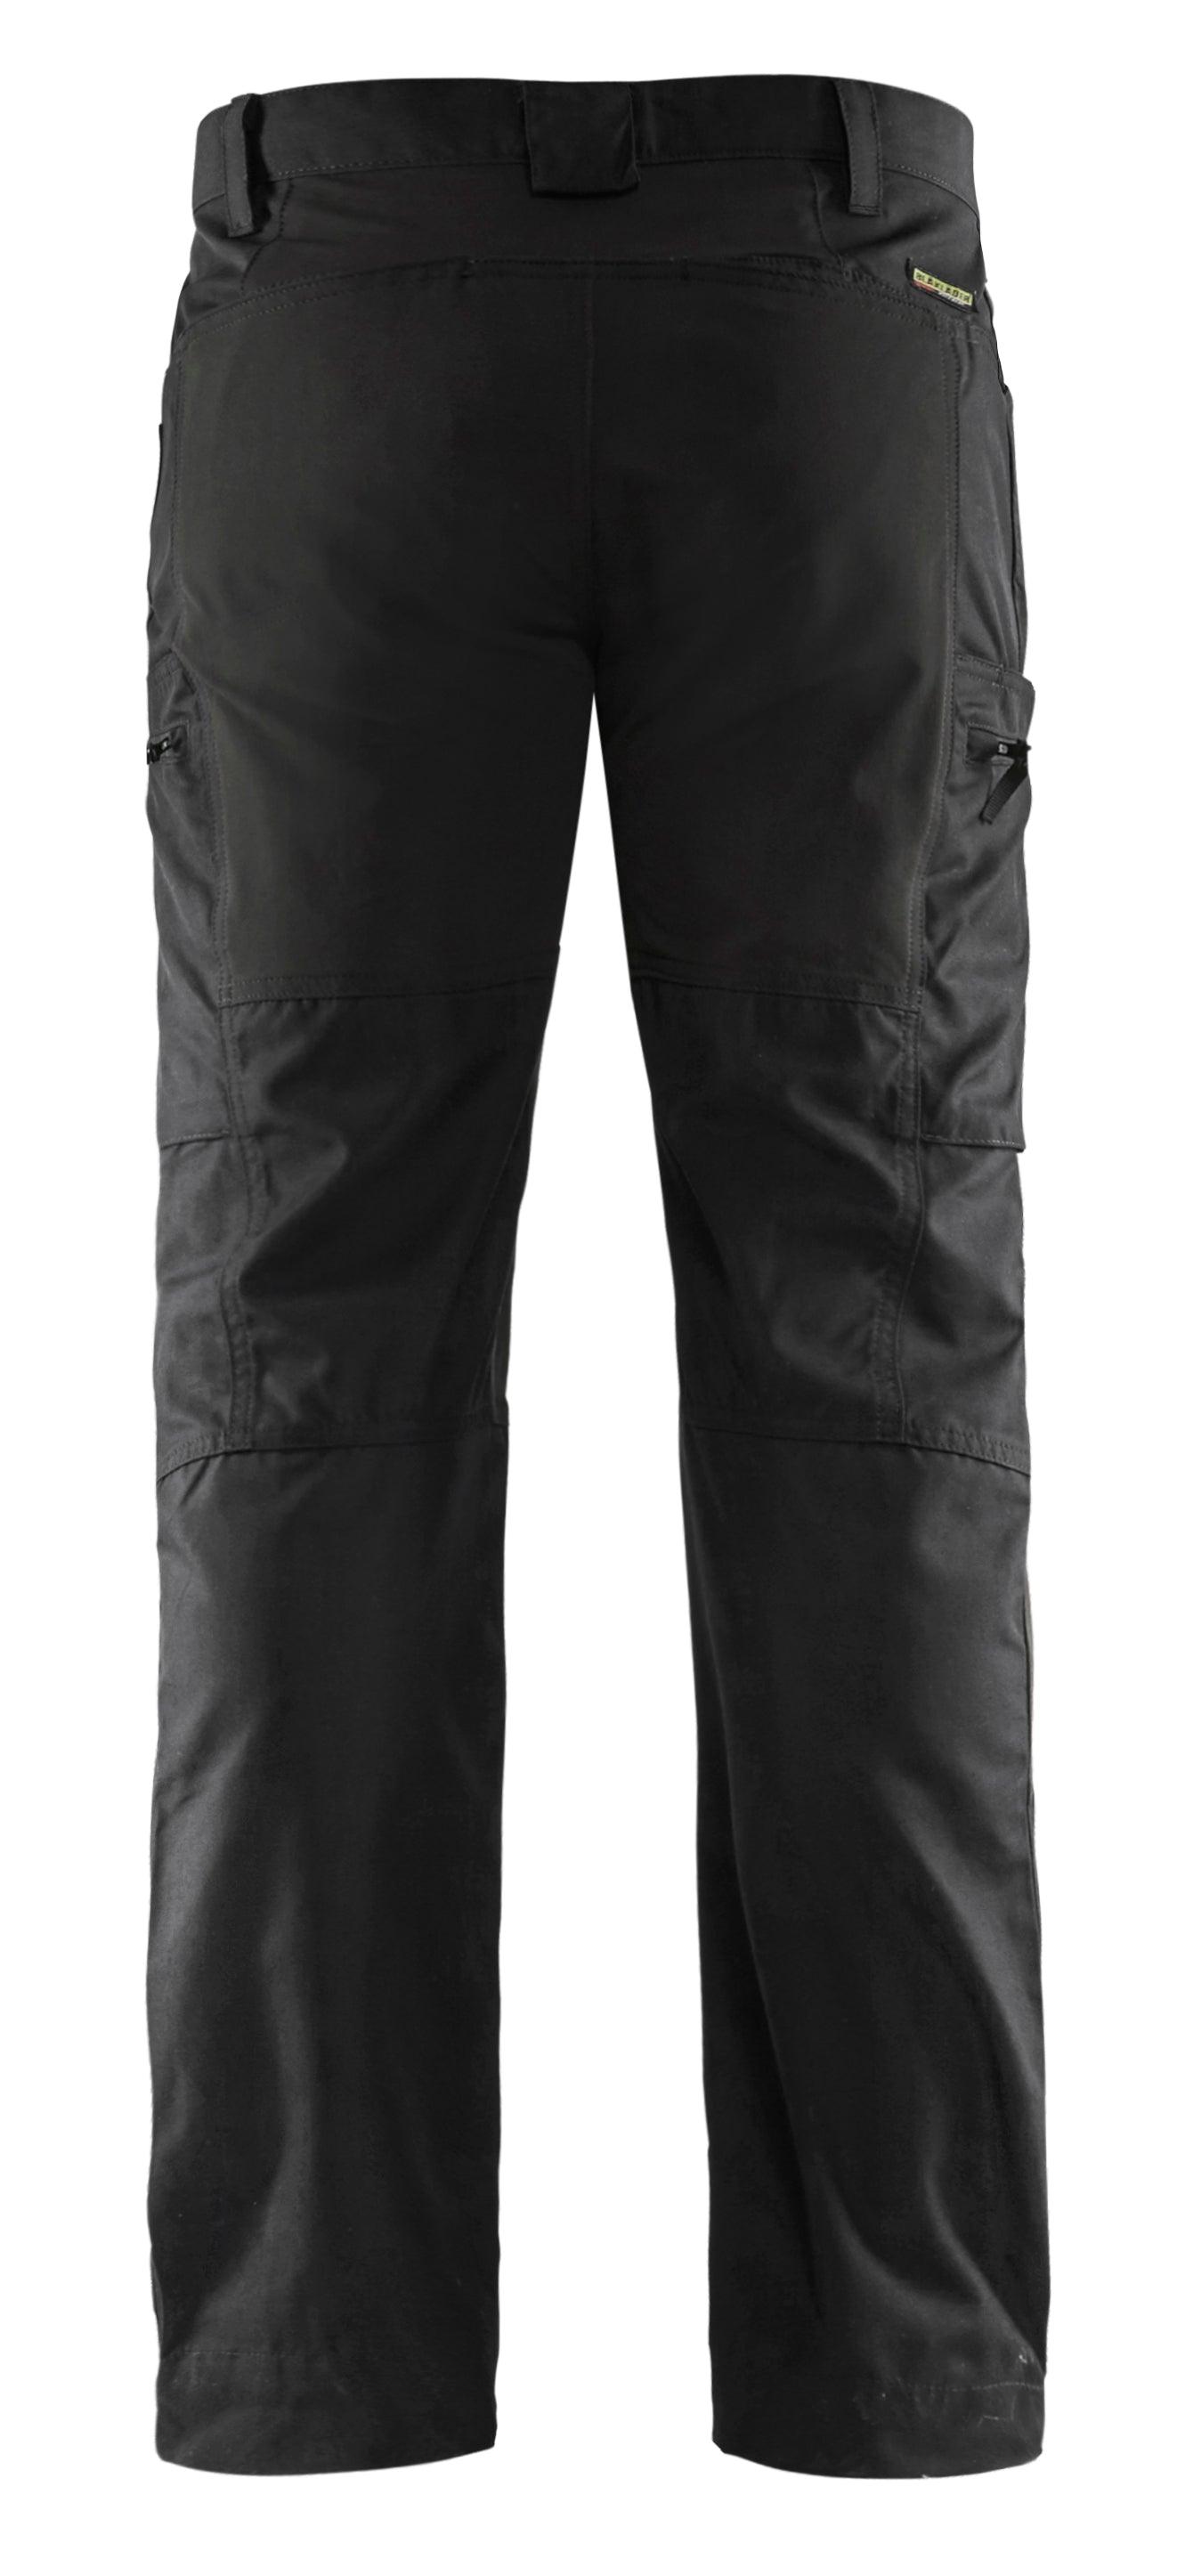 Blaklader 1655 5oz Service Pants with Stretch - Black - Trusted Gear Company LLC